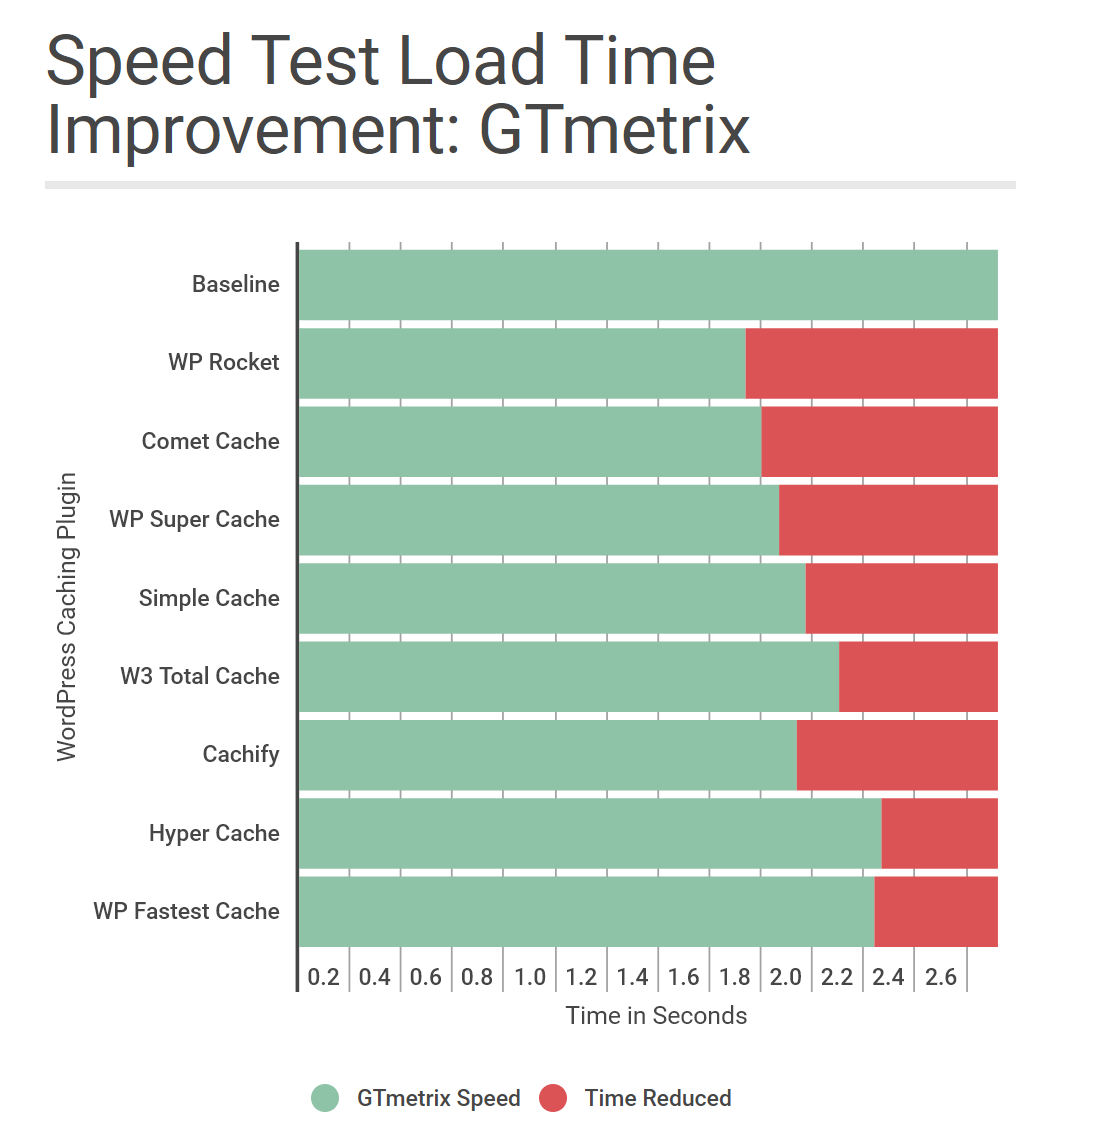 Speed Test Load Time Improvement